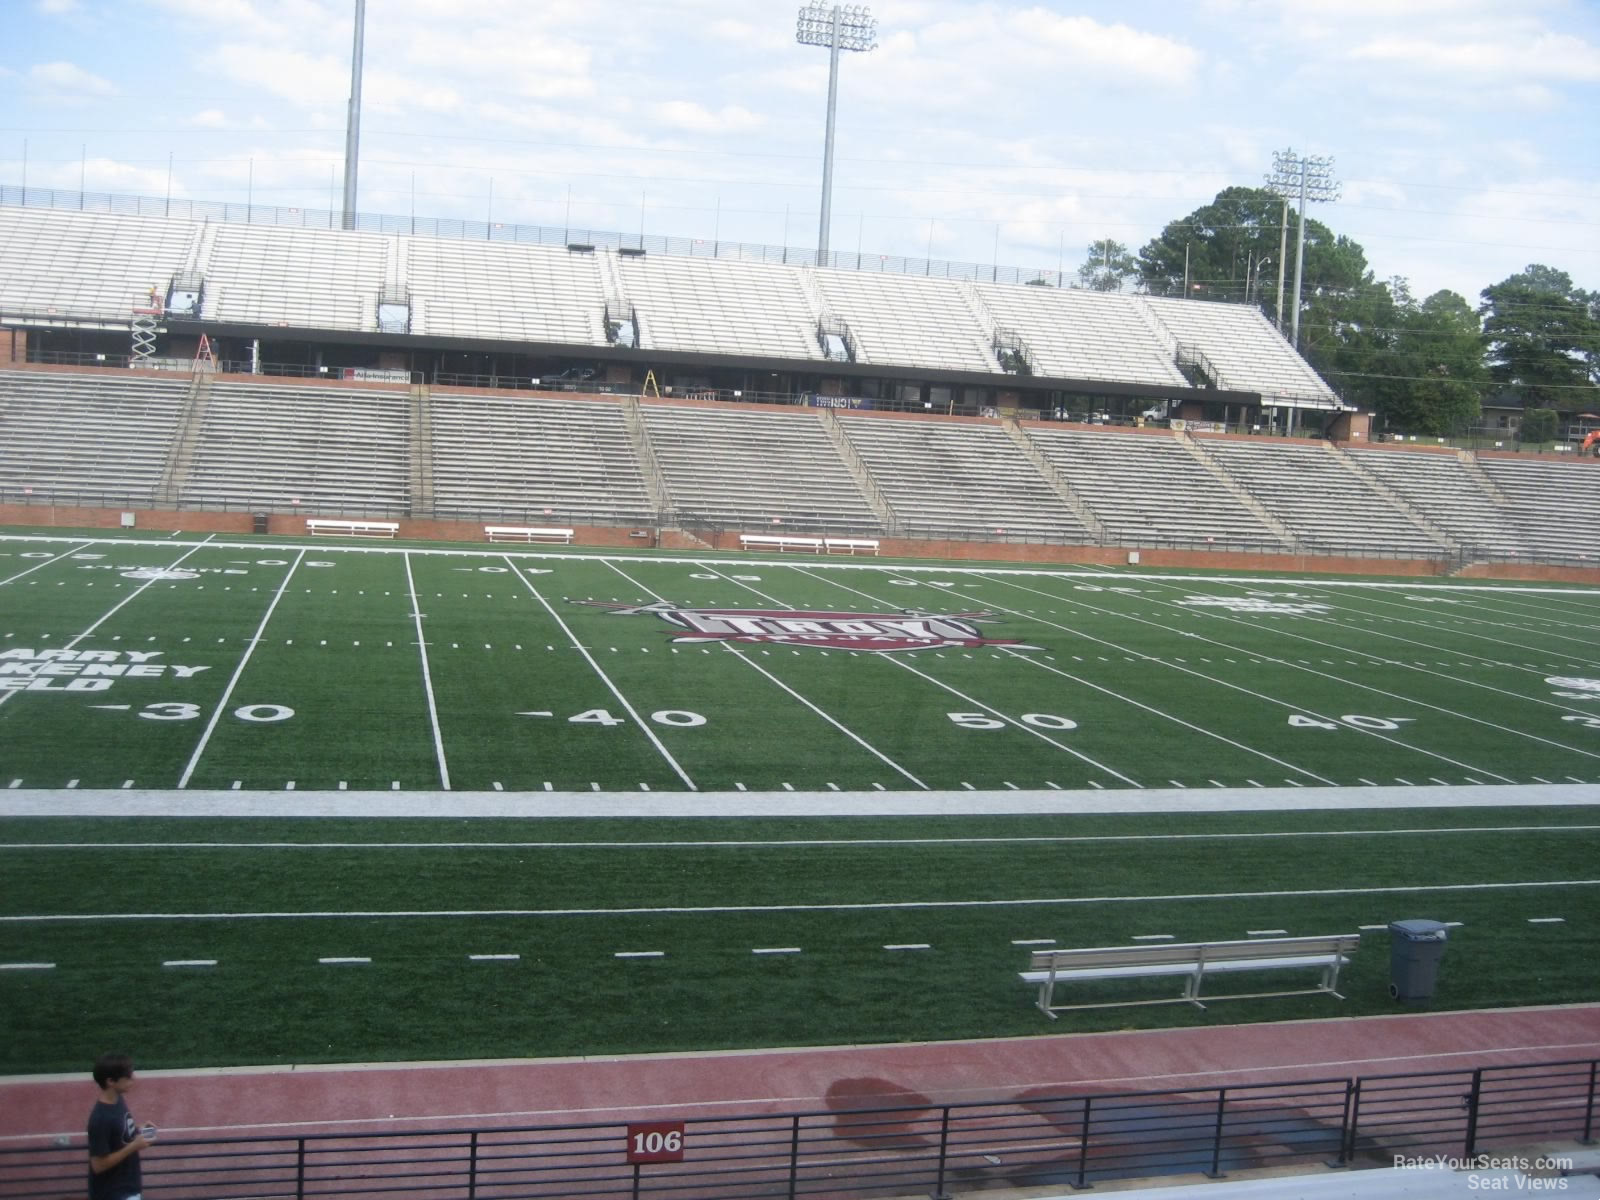 section 106, row 15 seat view  - troy memorial stadium